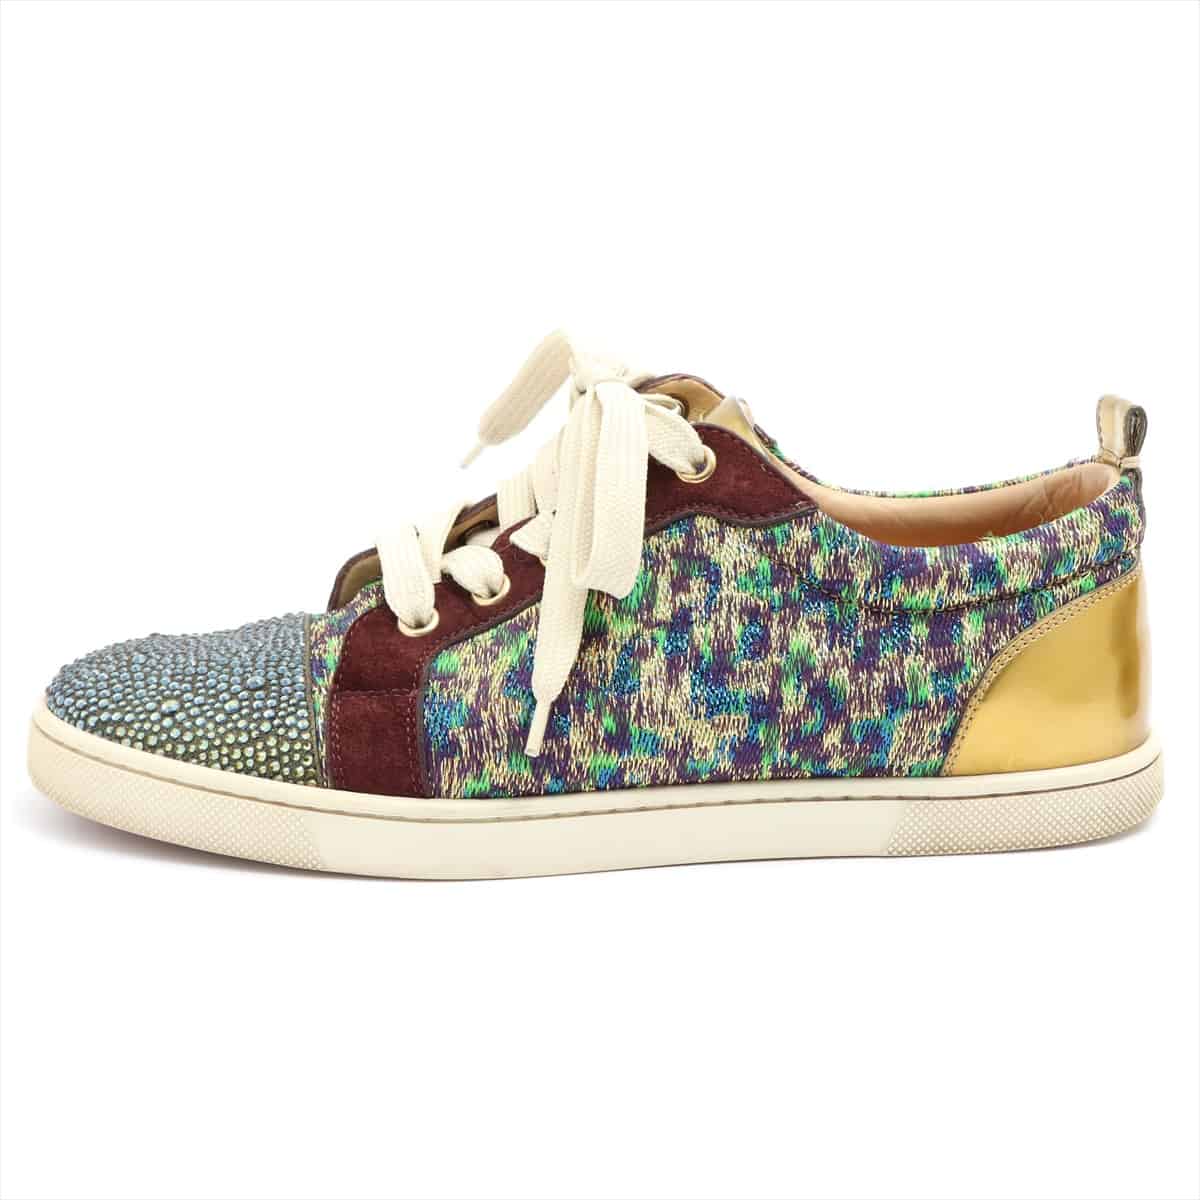 Christian Louboutin Fabric Sneakers 37 Ladies' Multicolor